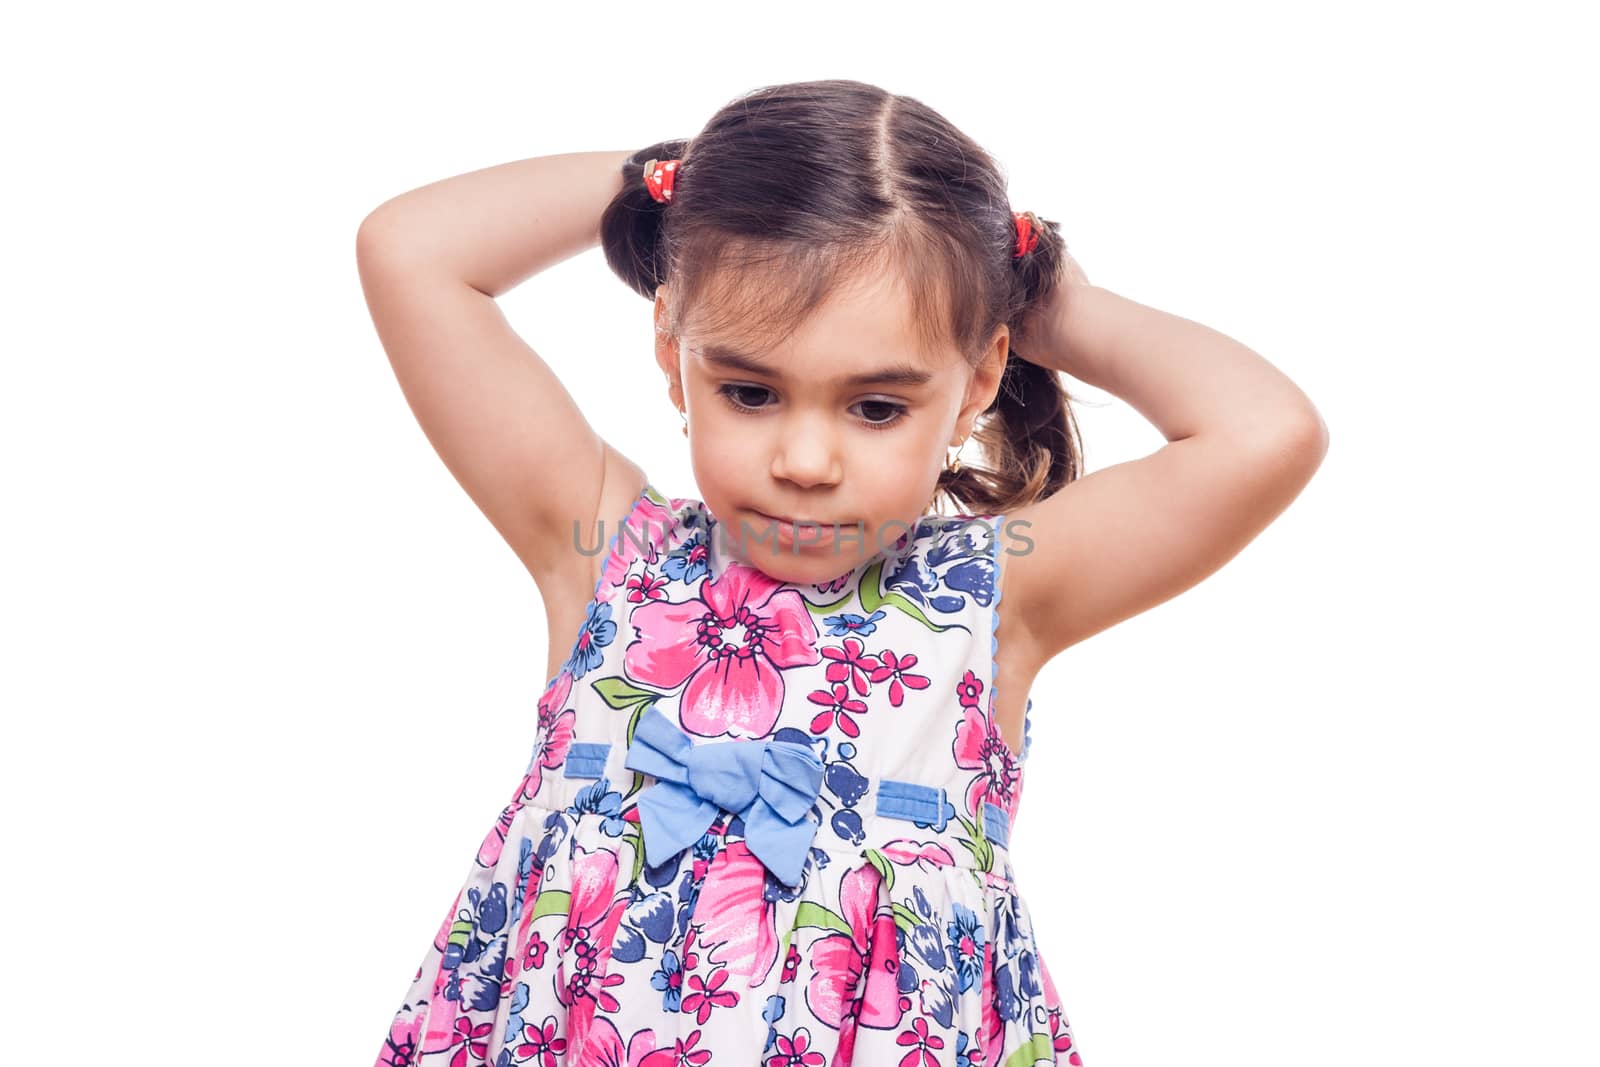 young girl on white background arranging her hair